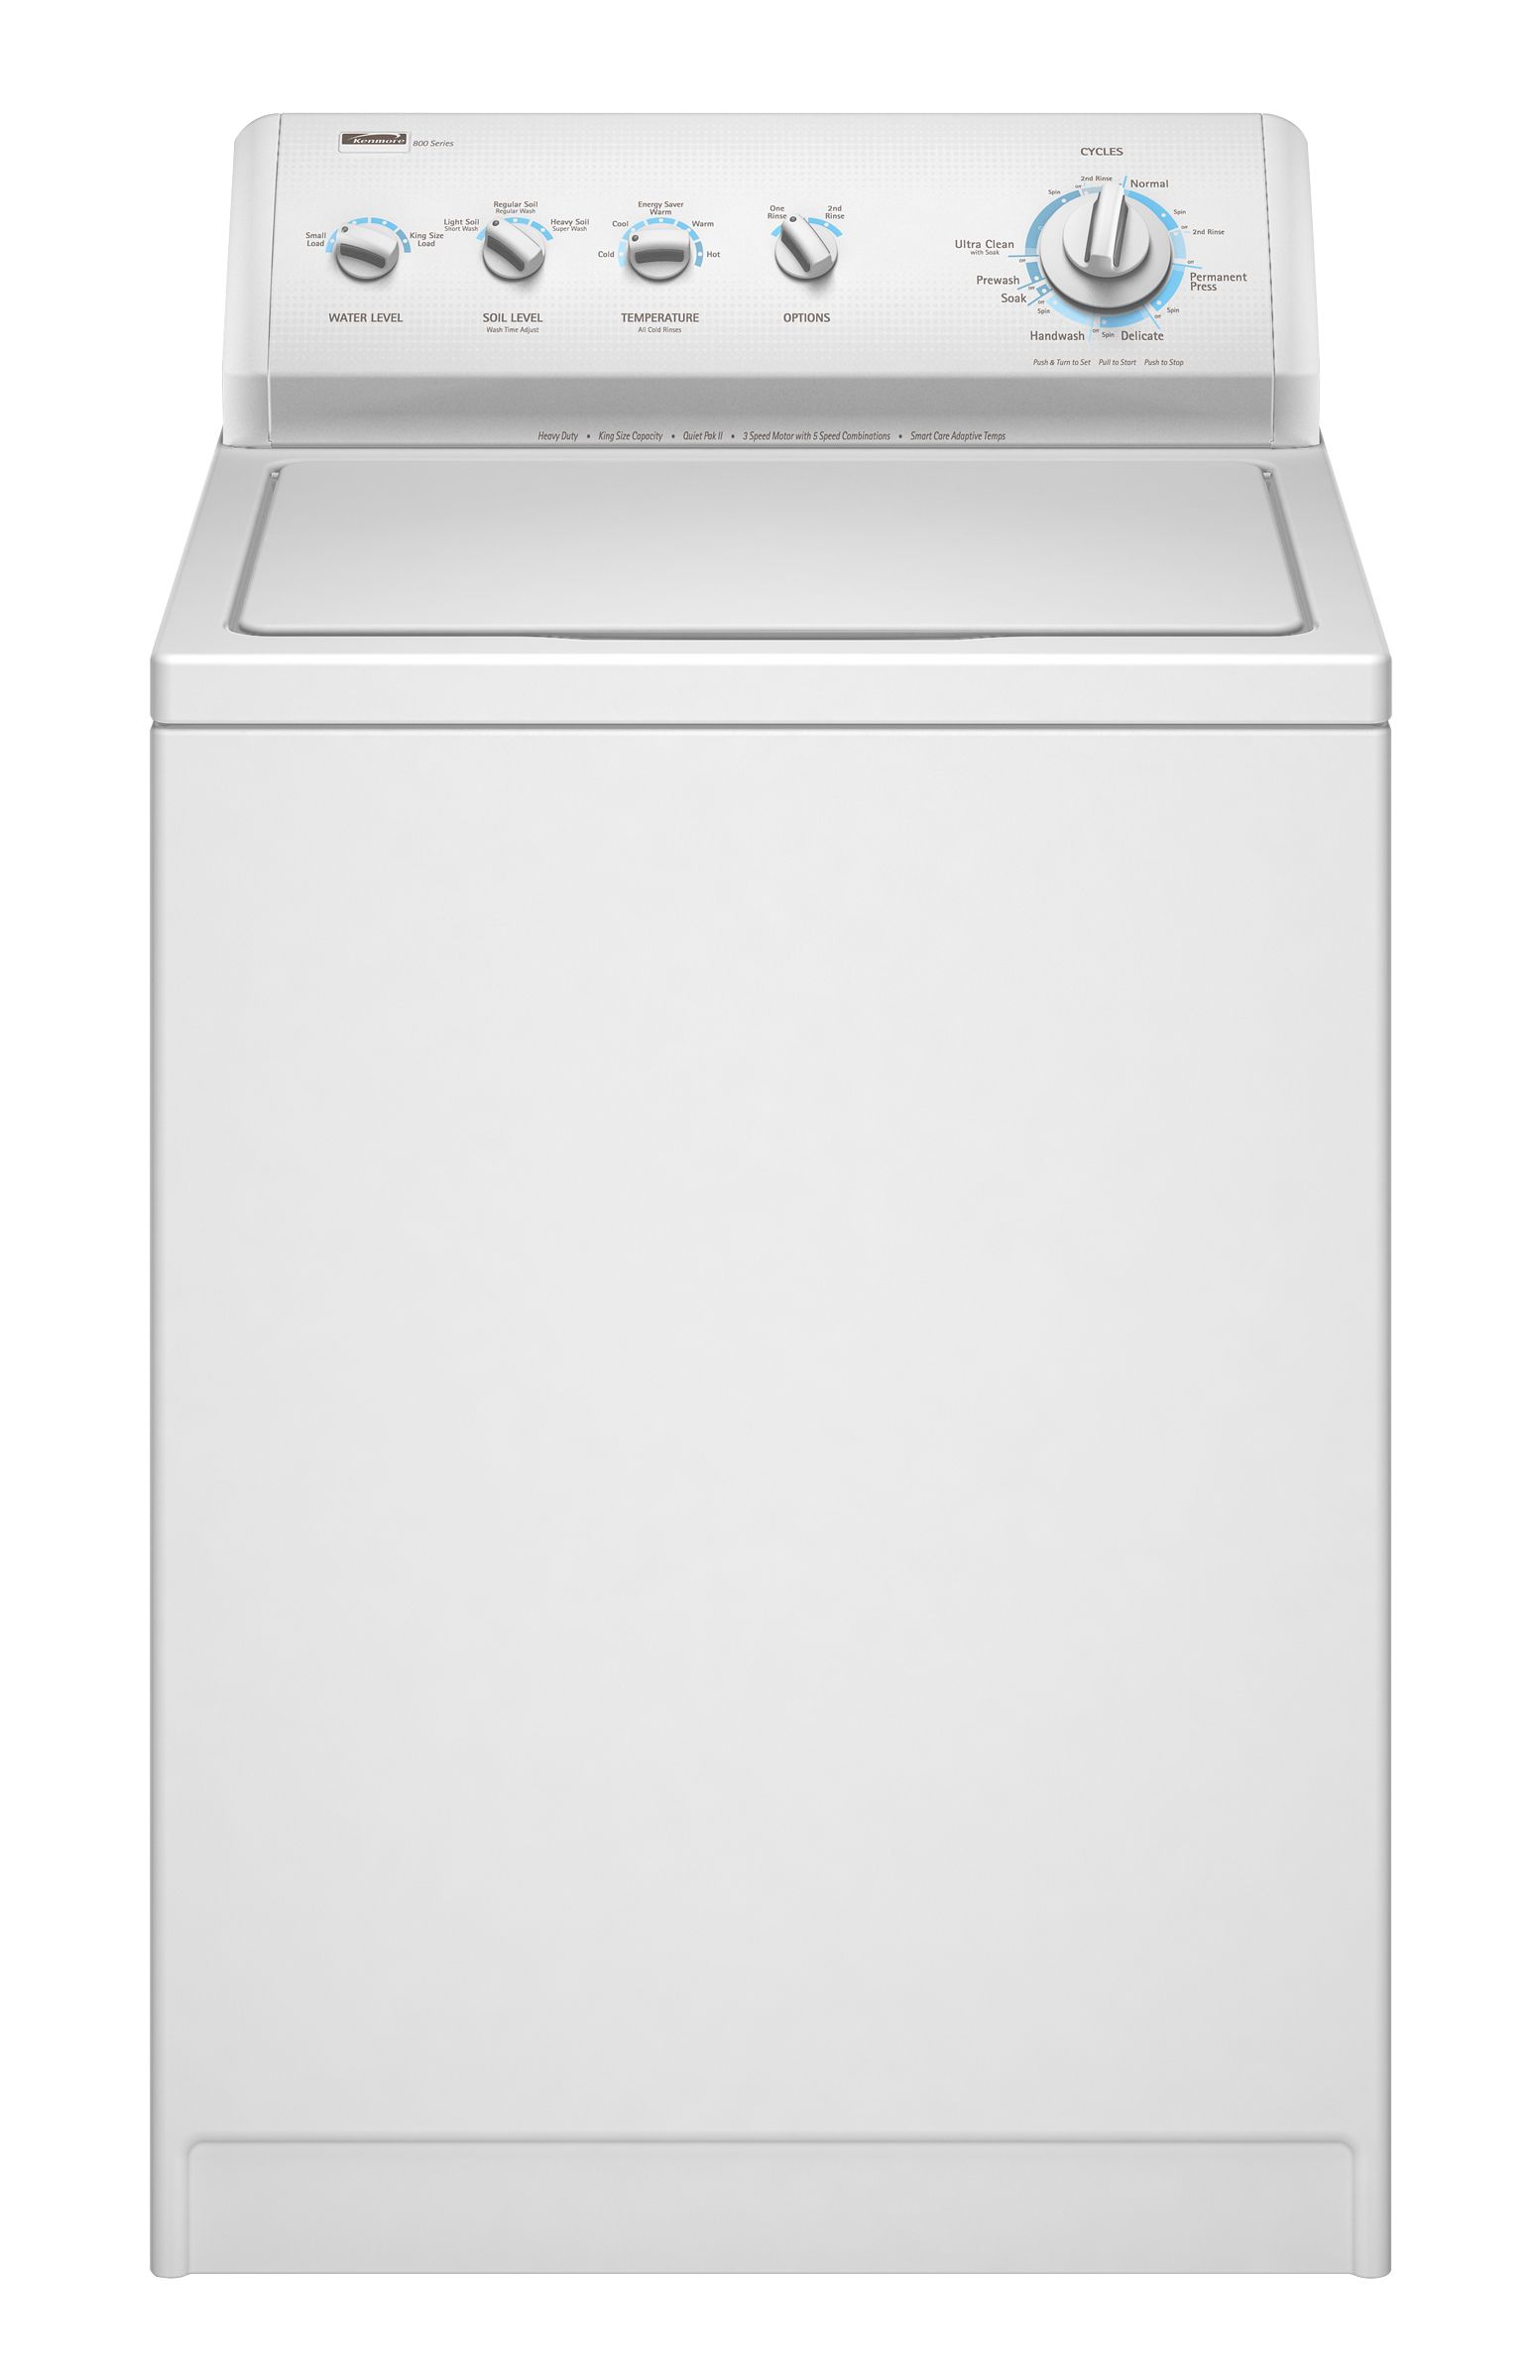 3.2 cu. ft. King Size Capacity Washer